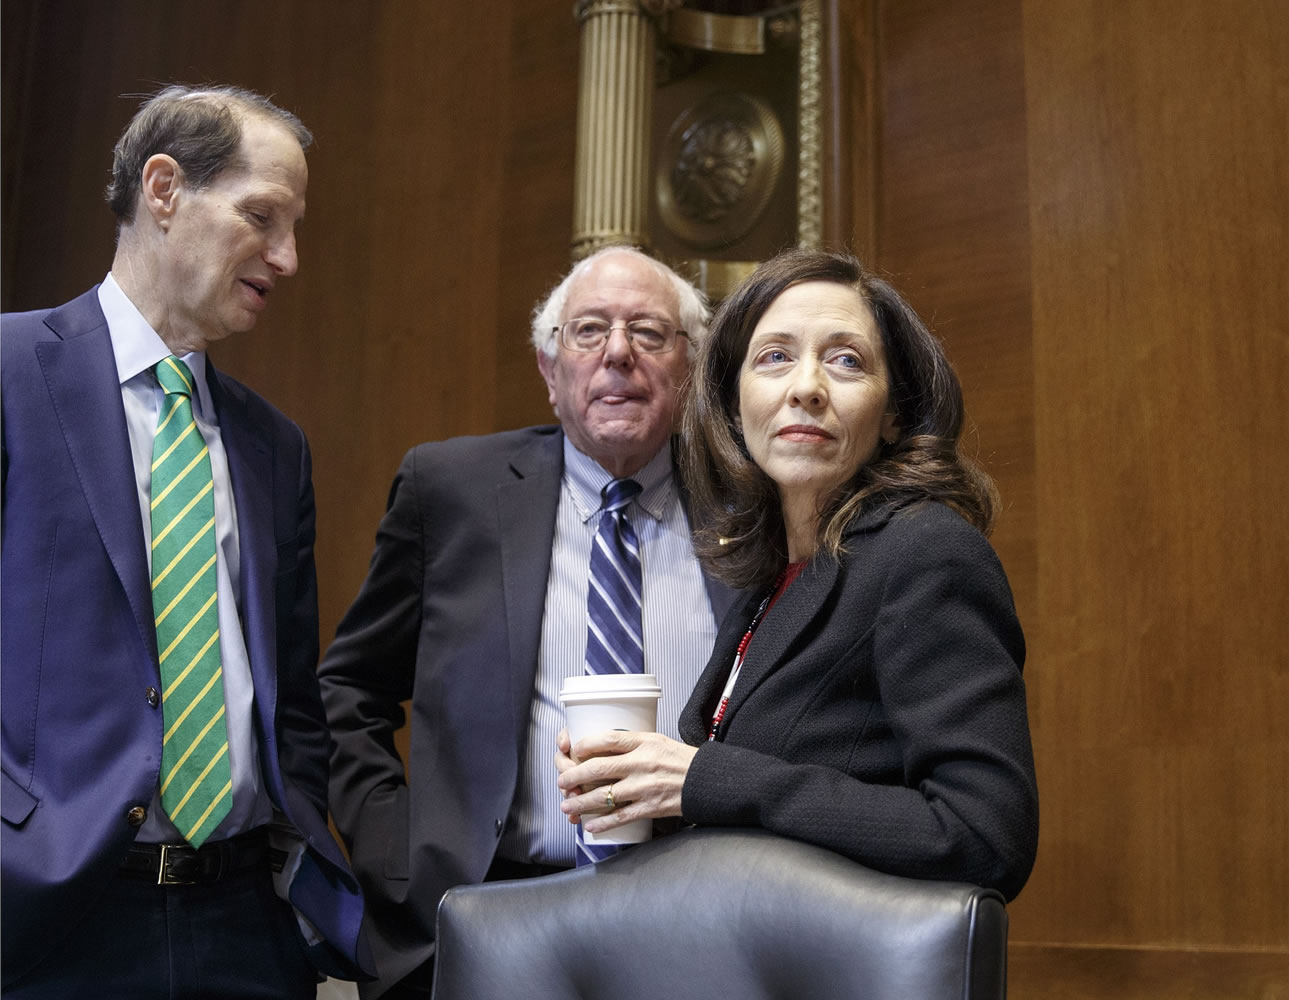 From left, Sen. Ron Wyden, D-Ore., Sen. Bernie Sanders, I-Vt., and Sen. Maria Cantwell, D-Wash., confer on Capitol Hill in Washington on Jan. 8.